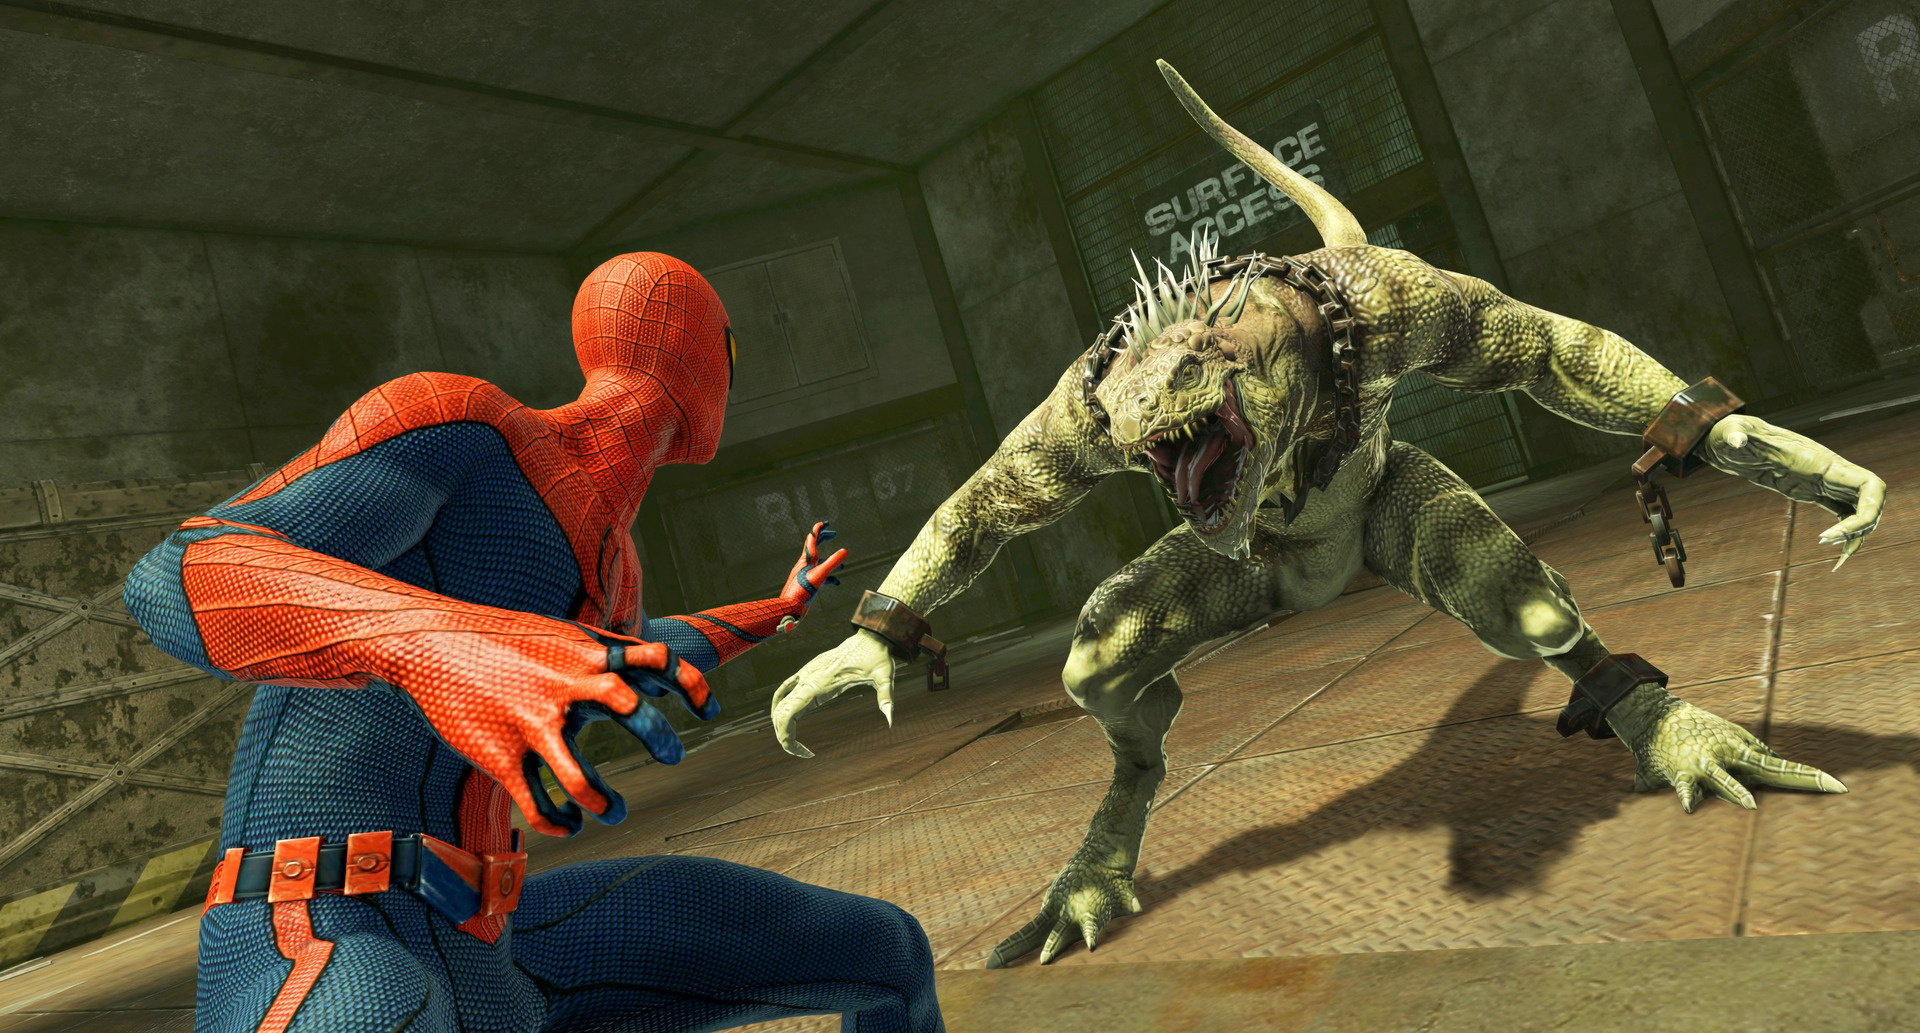 the amazing spider man 2 game pc download free